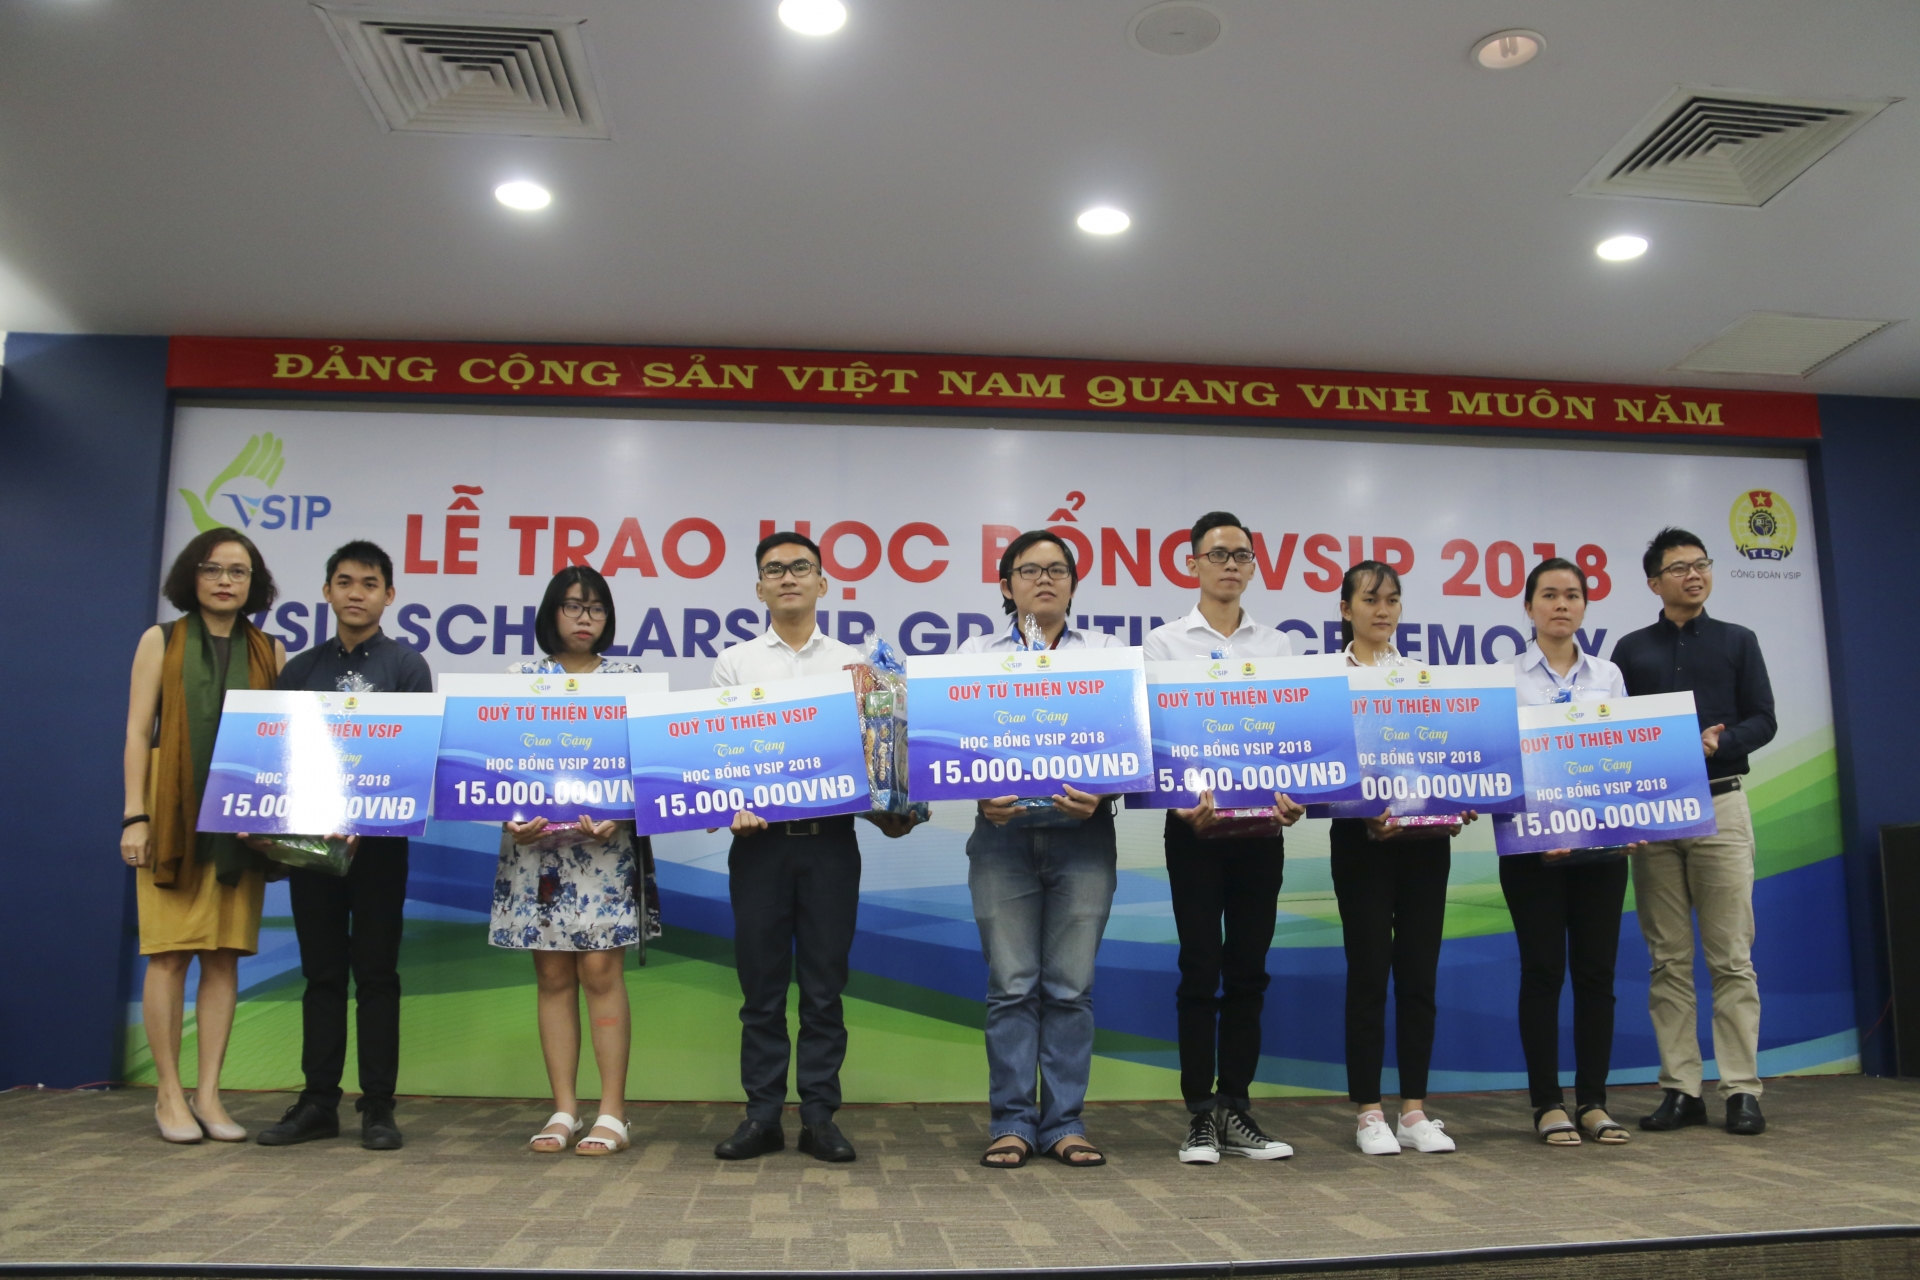 VSIP Charity Fund grants scholarships for students in Binh Duong